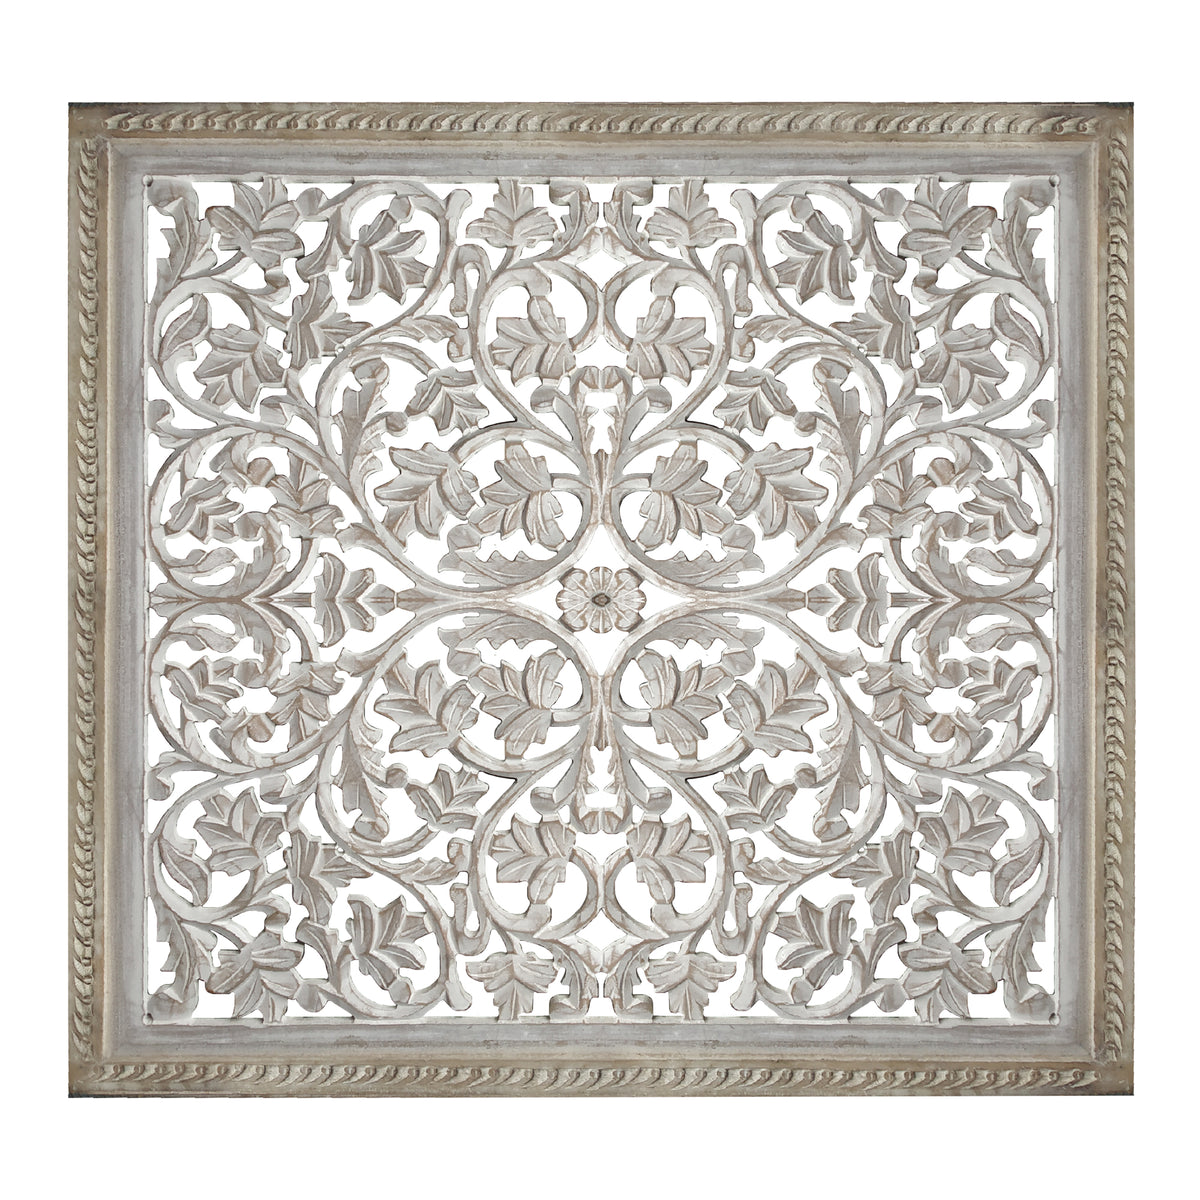 Square Shape Wooden Wall Panel with Cutout Sprig Pattern, Distressed White - BM01911